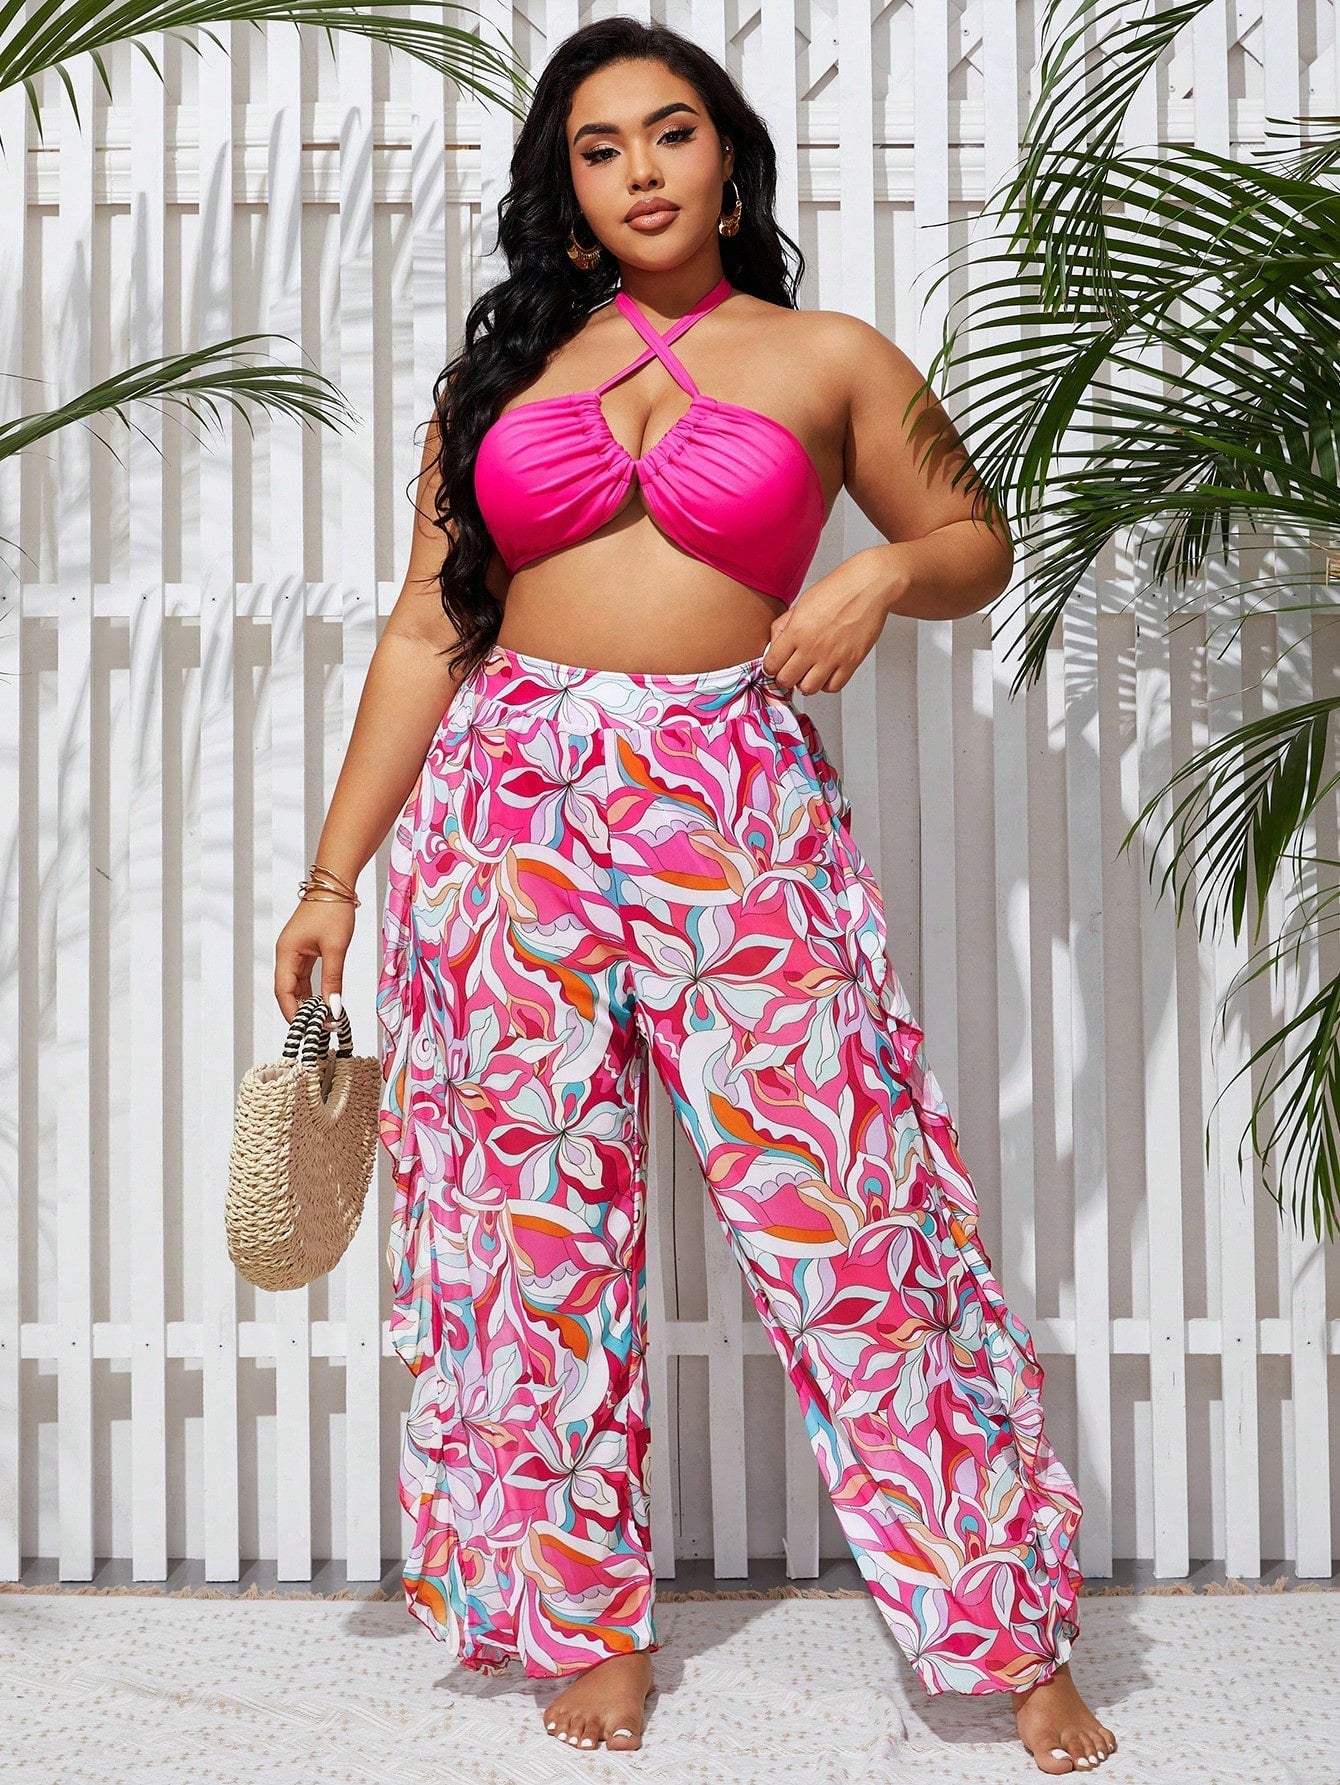 Women's Plus Size Printed Swimwear Set, Bikini Swimsuit With Cover Up Pants Bathing Suit Beach Outfit Summer Vacation